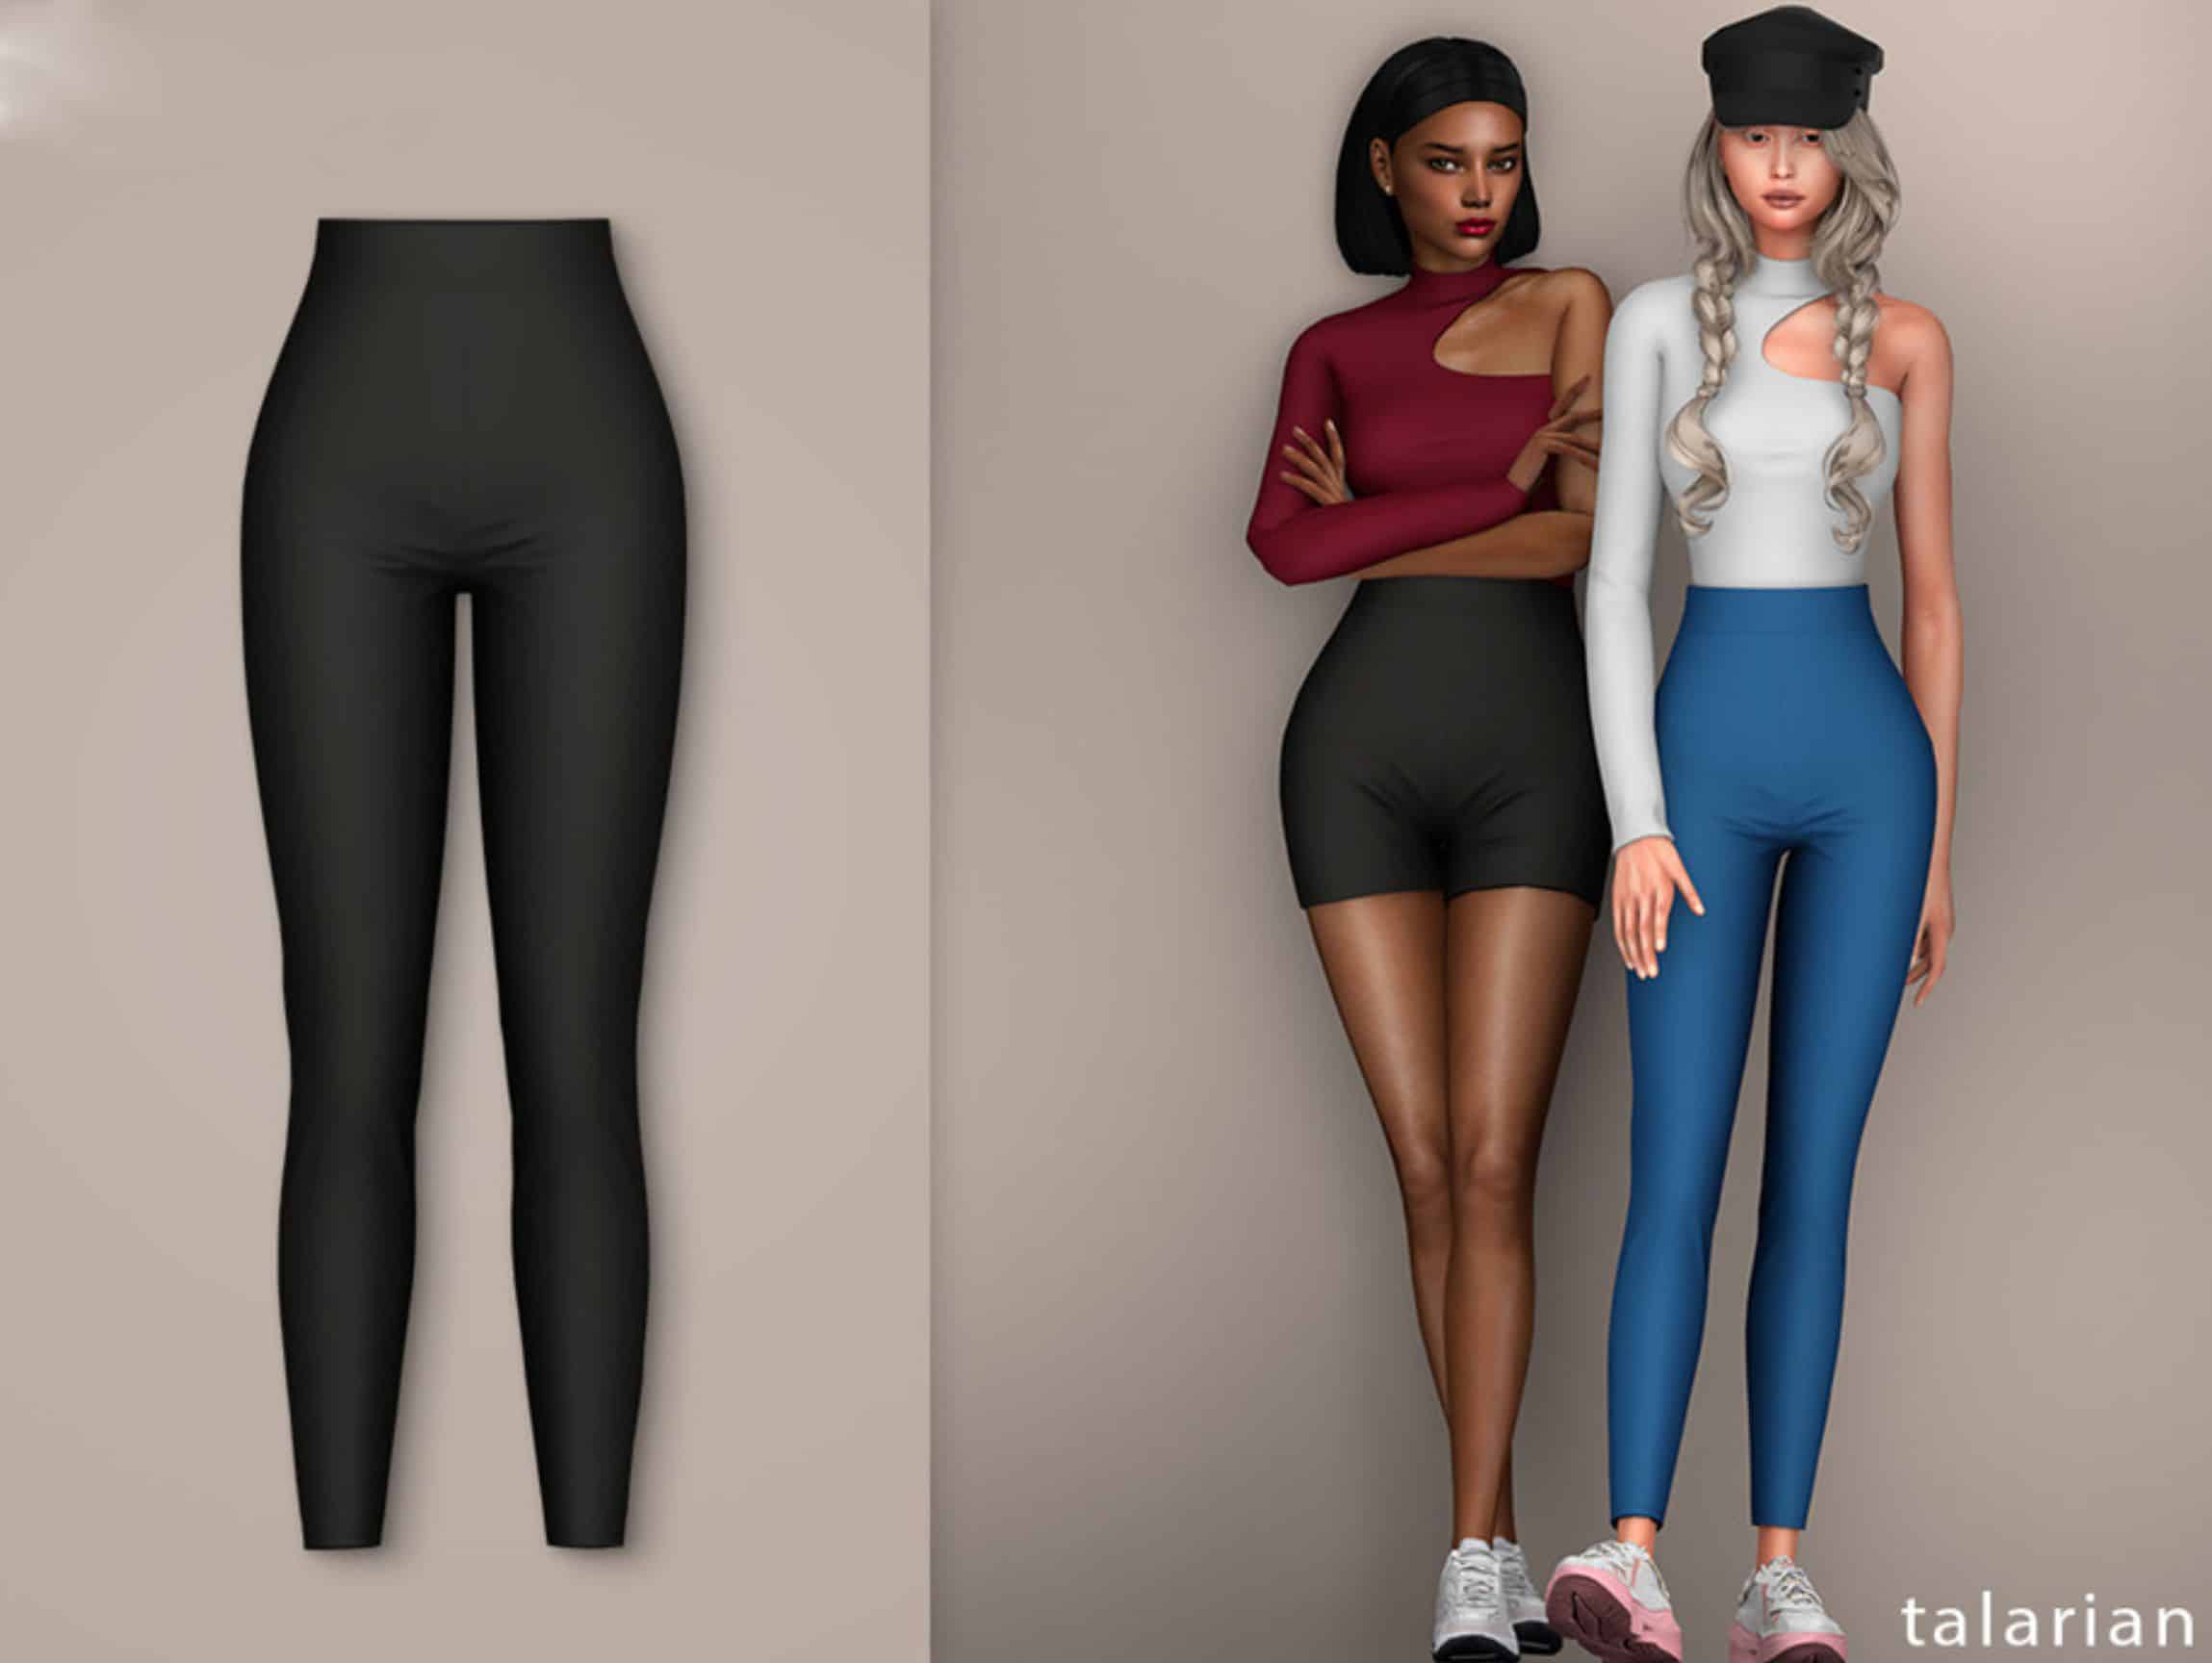 sims 4 mods poses